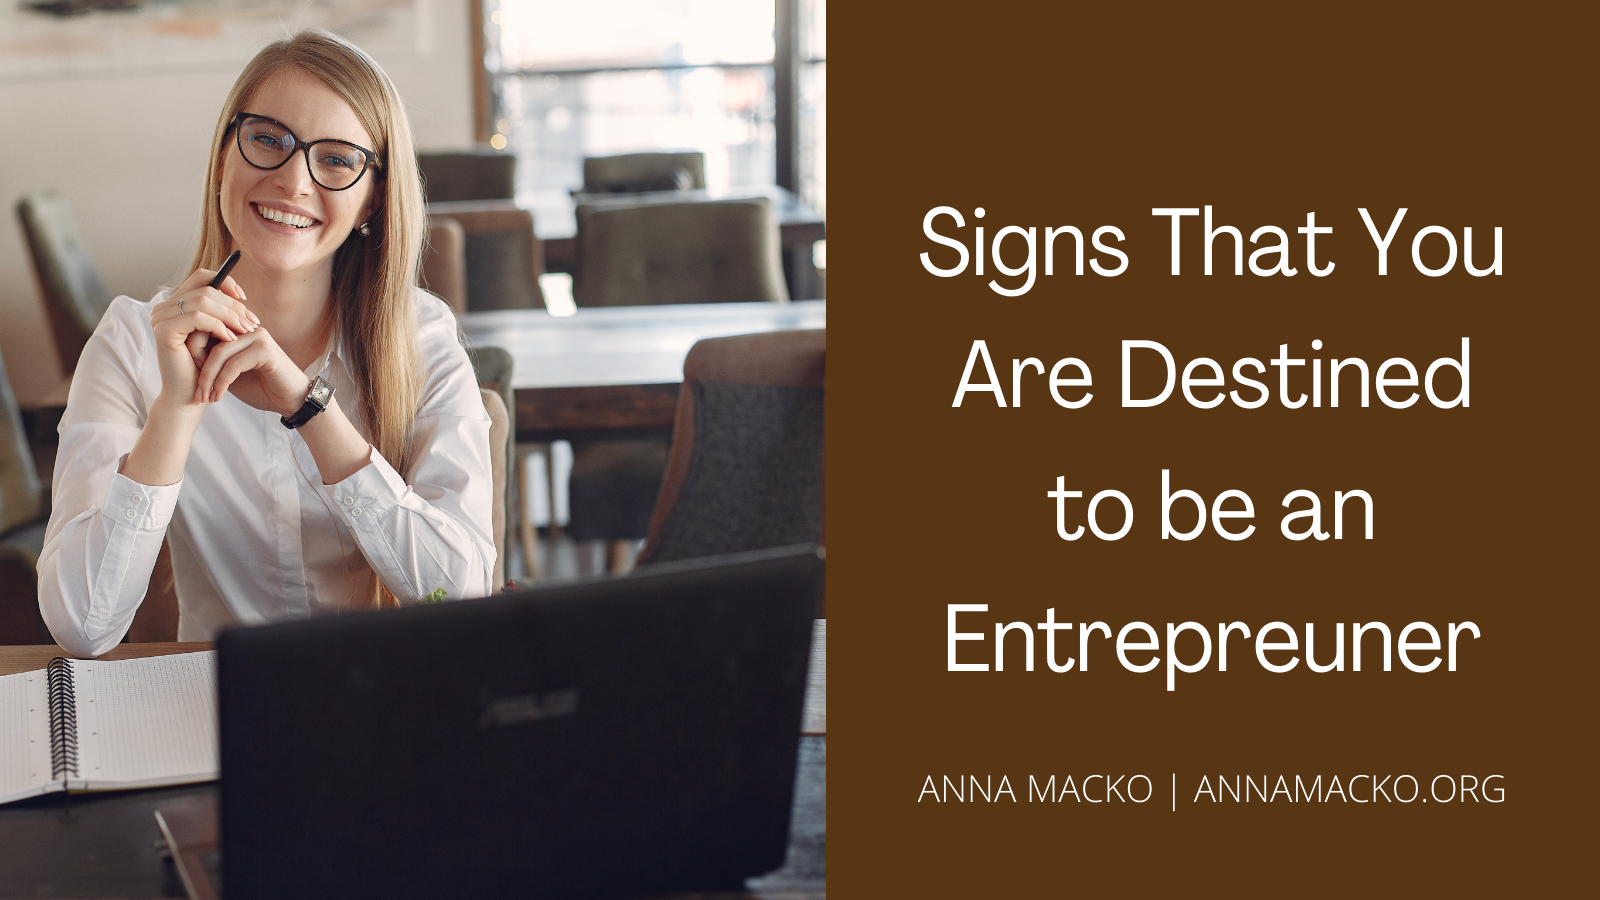 Signs That You
Are Destined
to be an
Entrepreuner

ANNA MACKO | ANNAMACKO.ORG